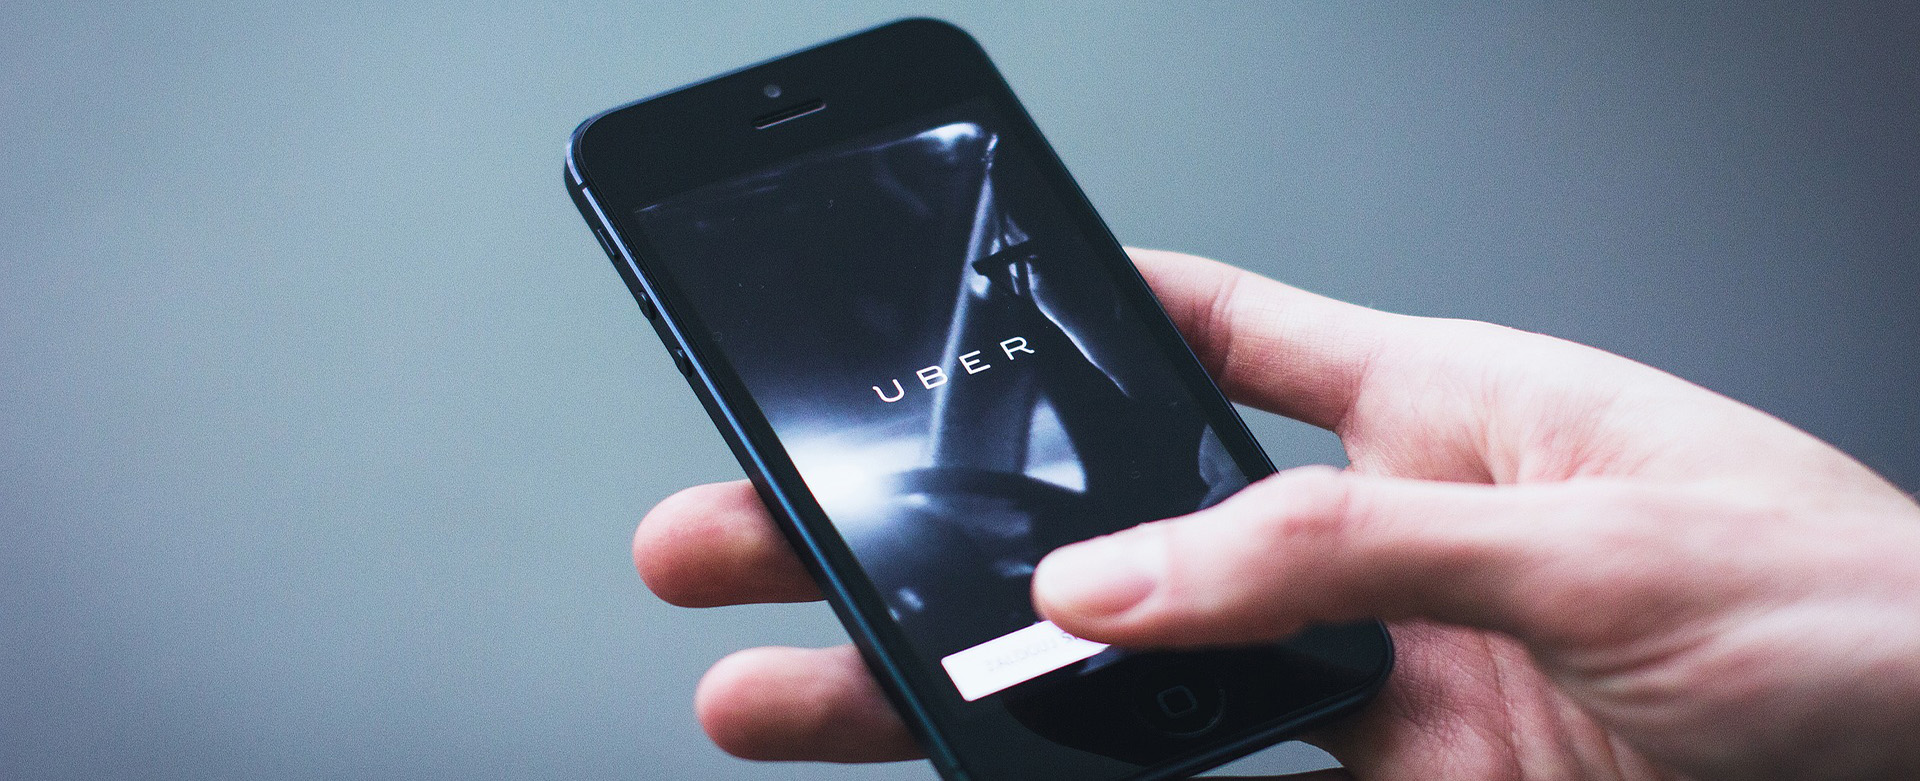 How the Uber Fee System Works for Your Car or TLC Car Rental